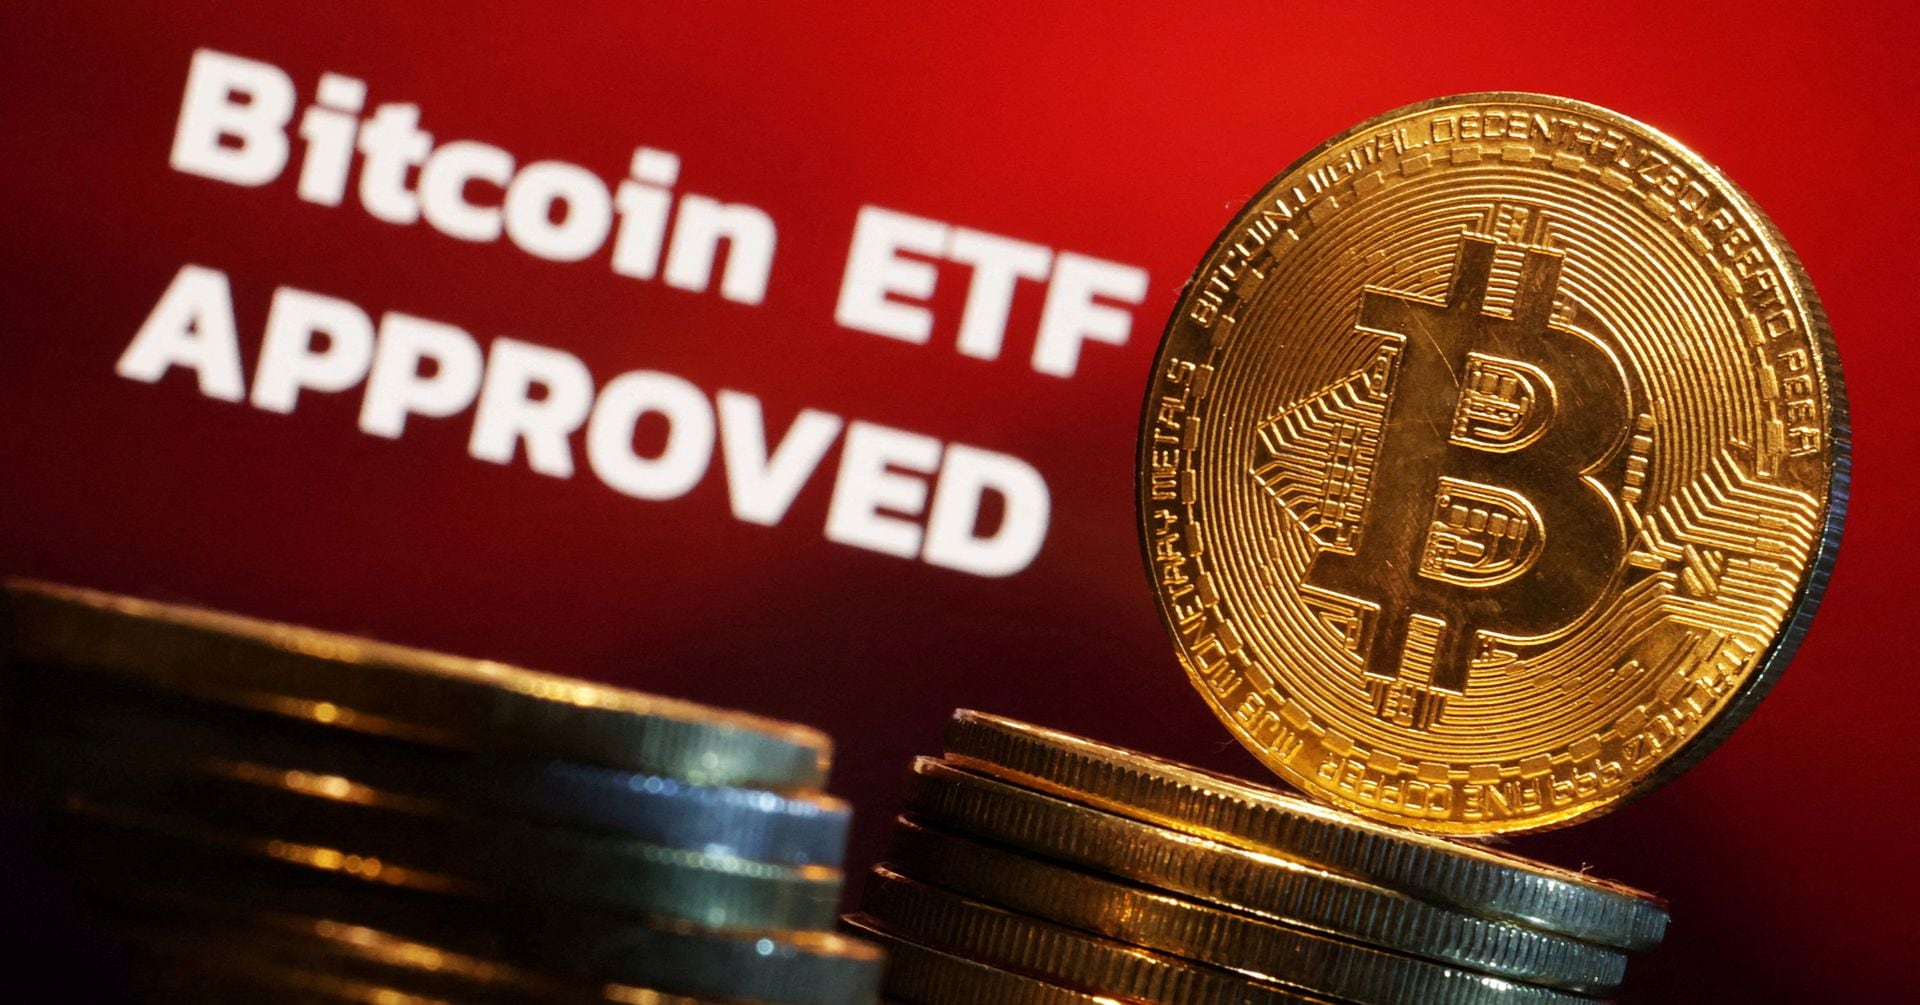 Bitcoin ETF approval a milestone for crytpocurrencies - News | Khaleej Times